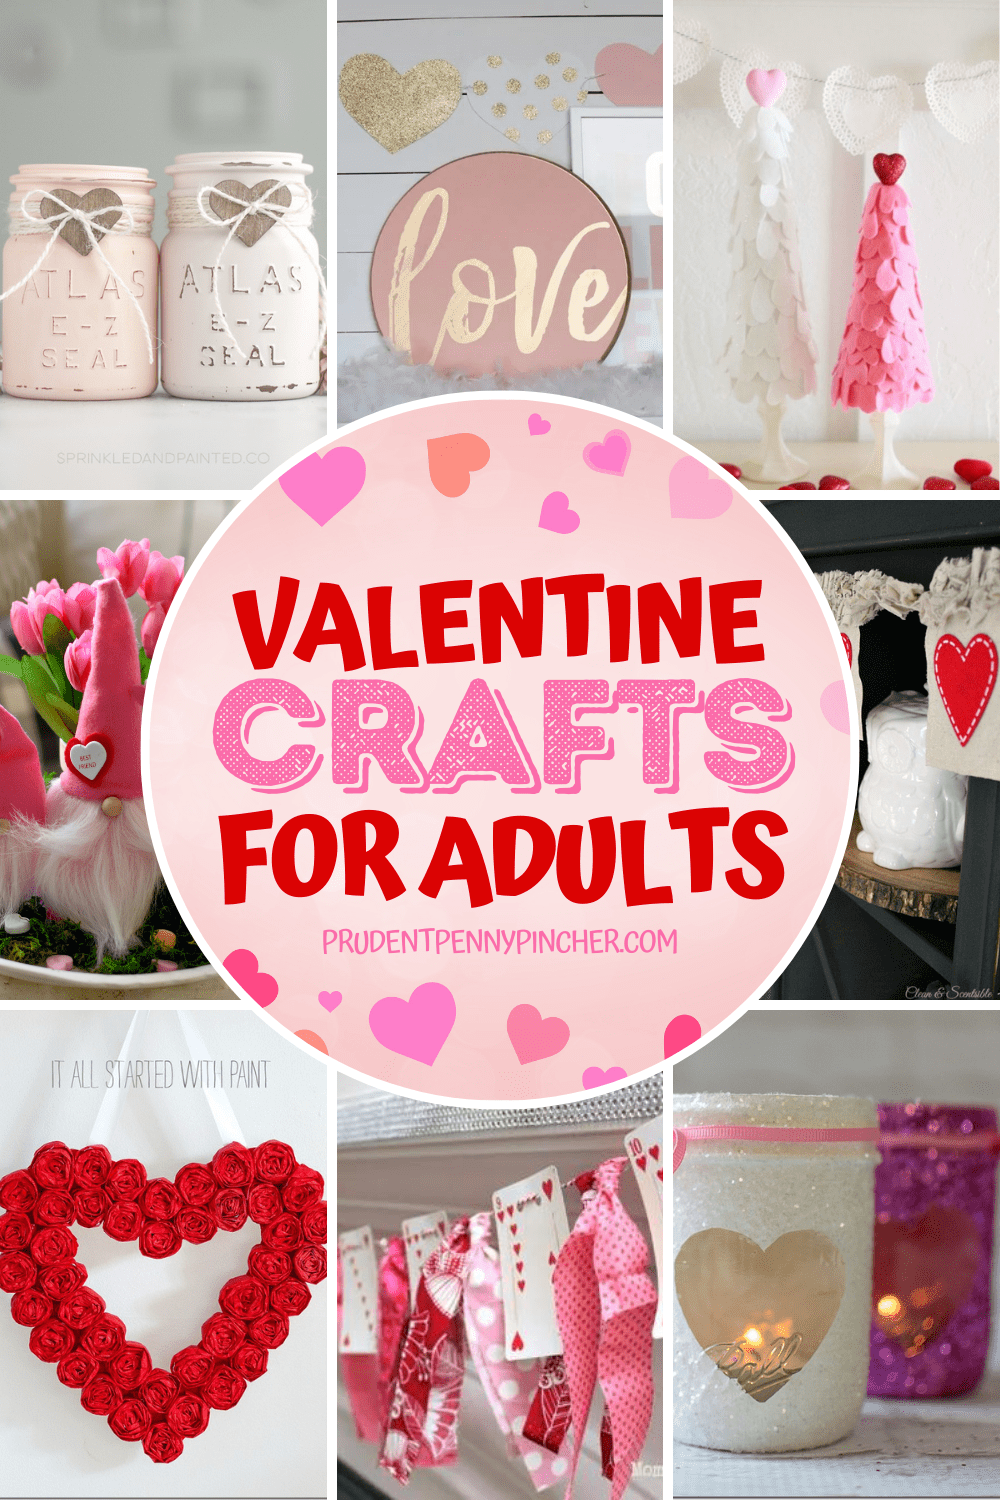 50 DIY Valentine Crafts for Adults - Prudent Penny Pincher